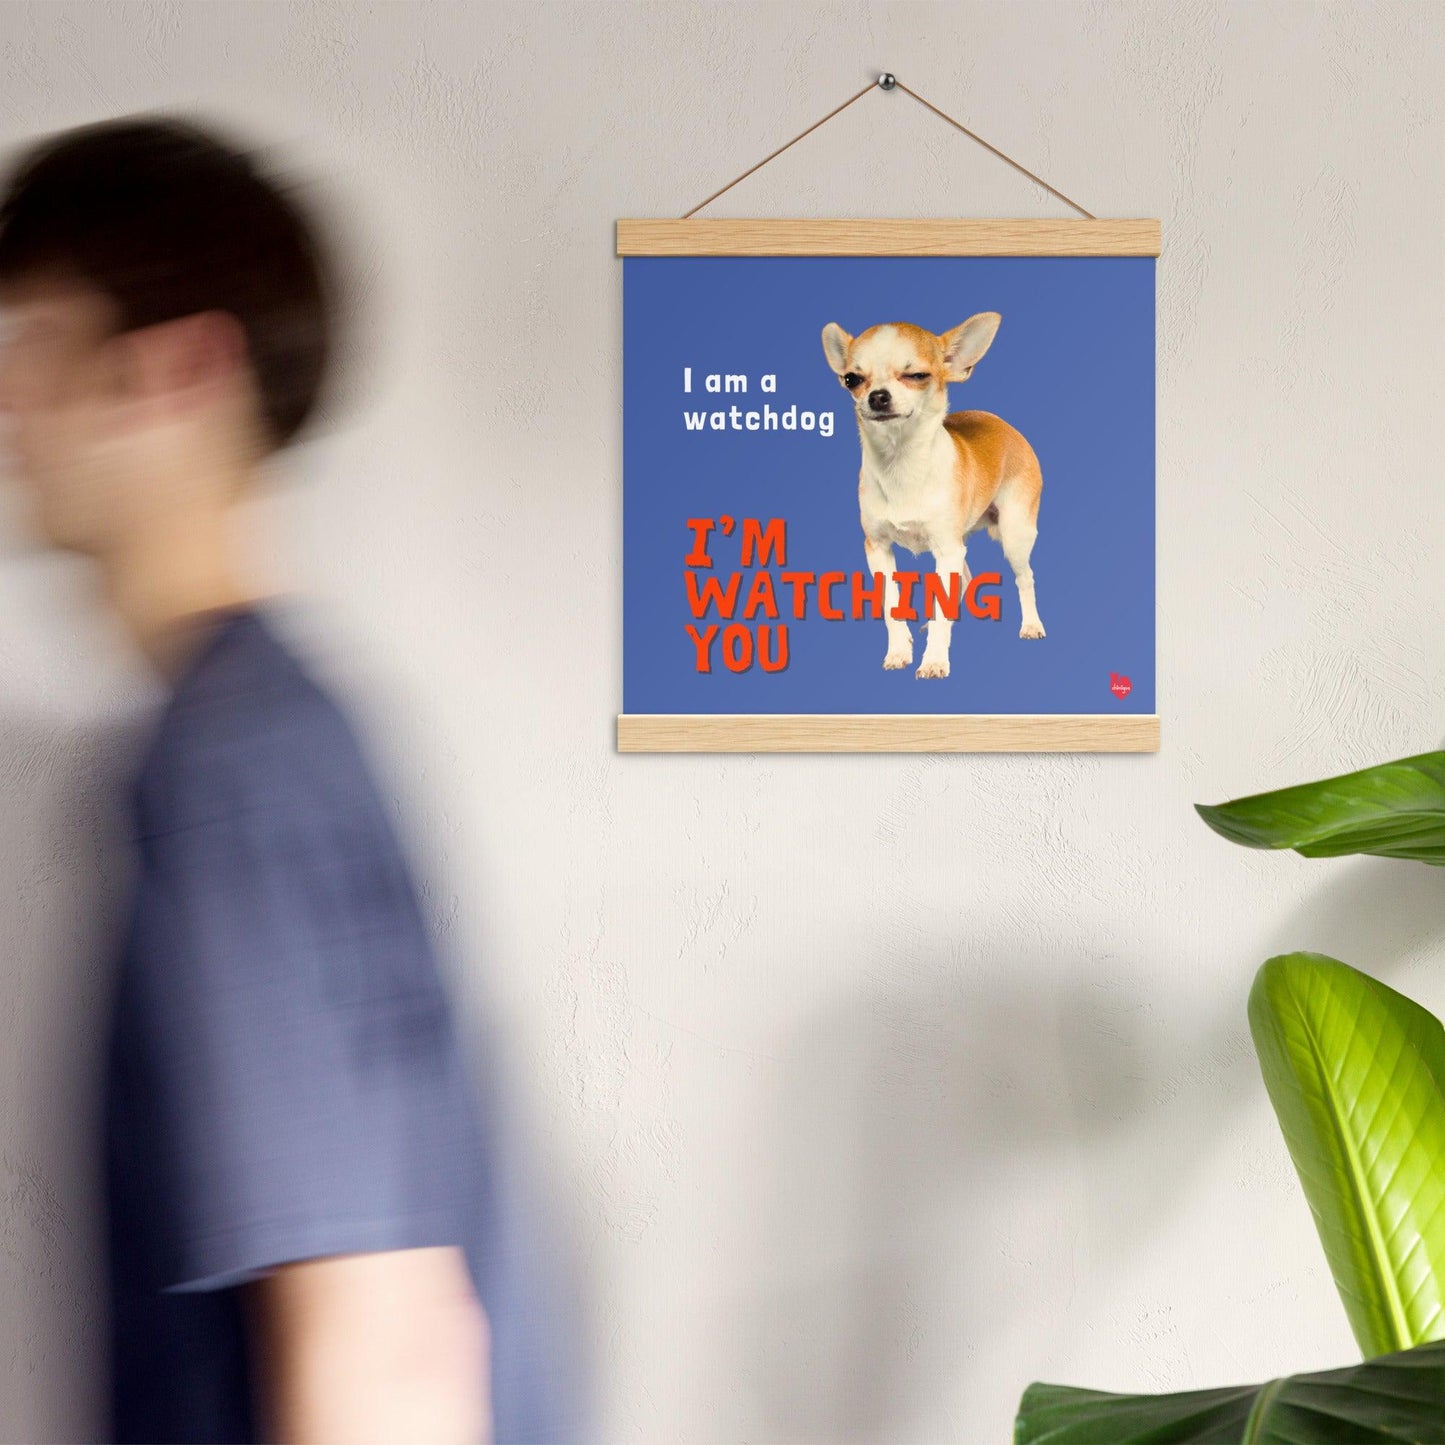 Chimigos Chihuahua Meme - I am a watchdog; I'M WATCHING YOU - poster with wooden hangers - Chimigos